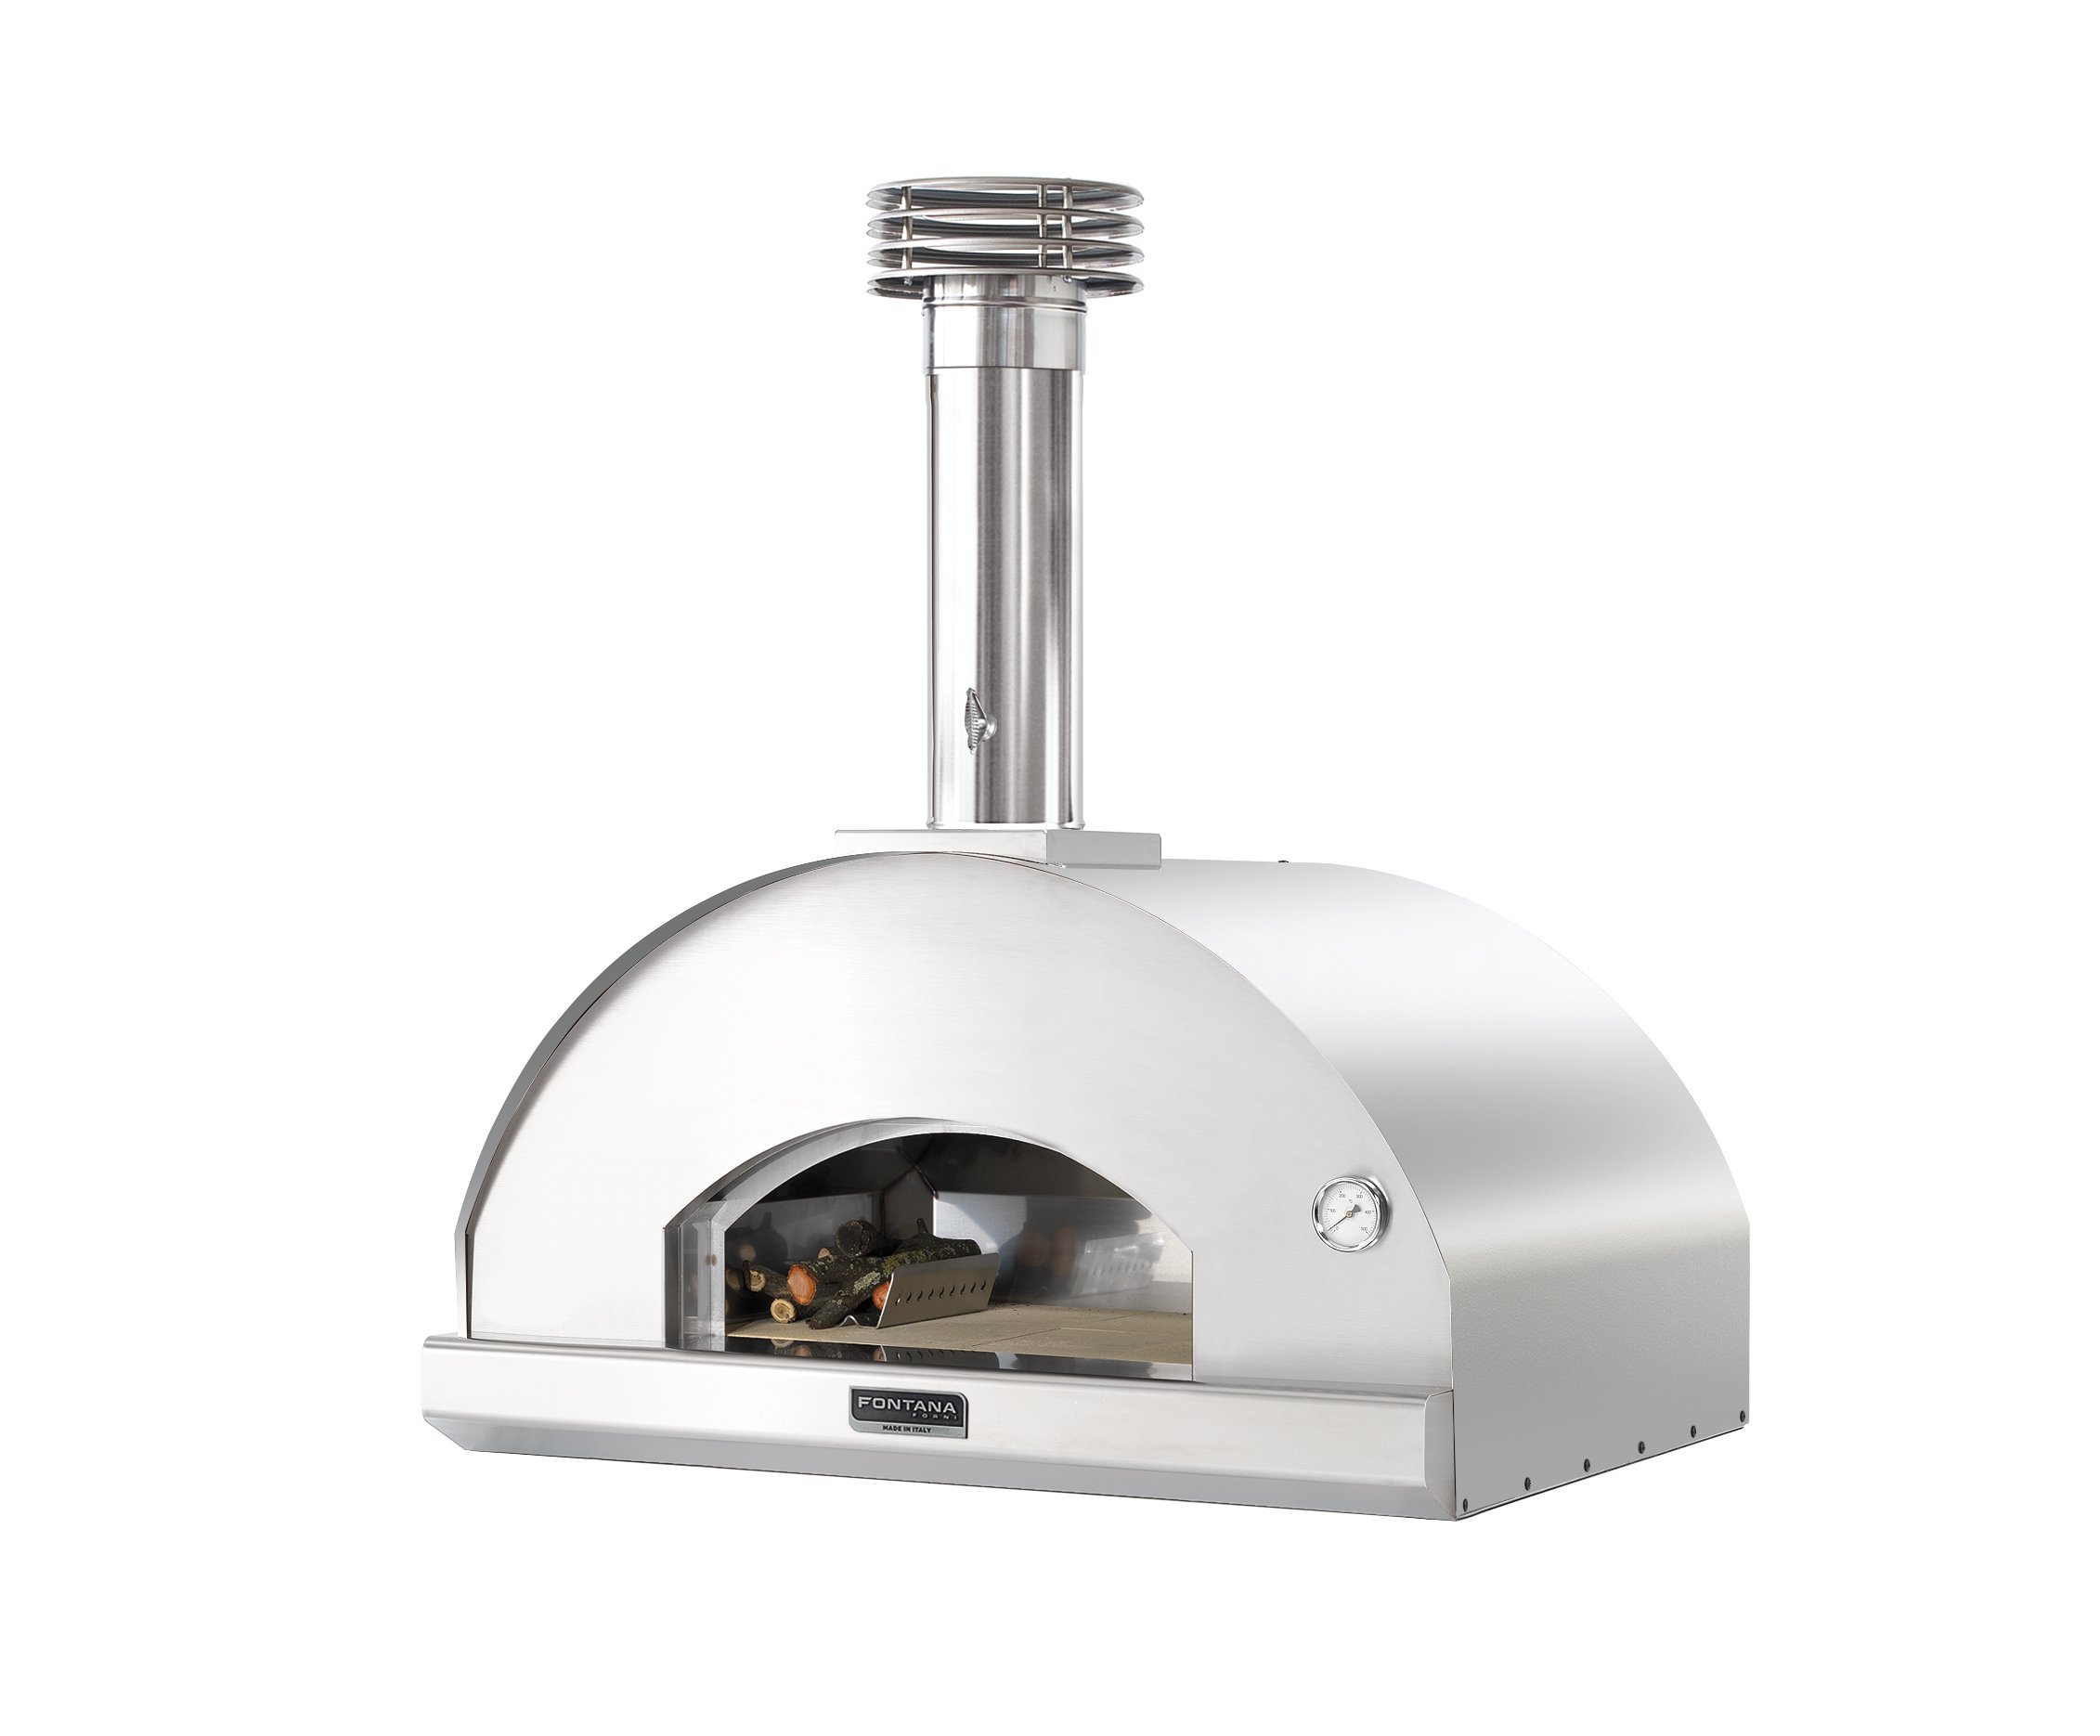 Dome oven Fontana Mangiafuoco with wood firing, pizza oven for outdoor kitchen, inox